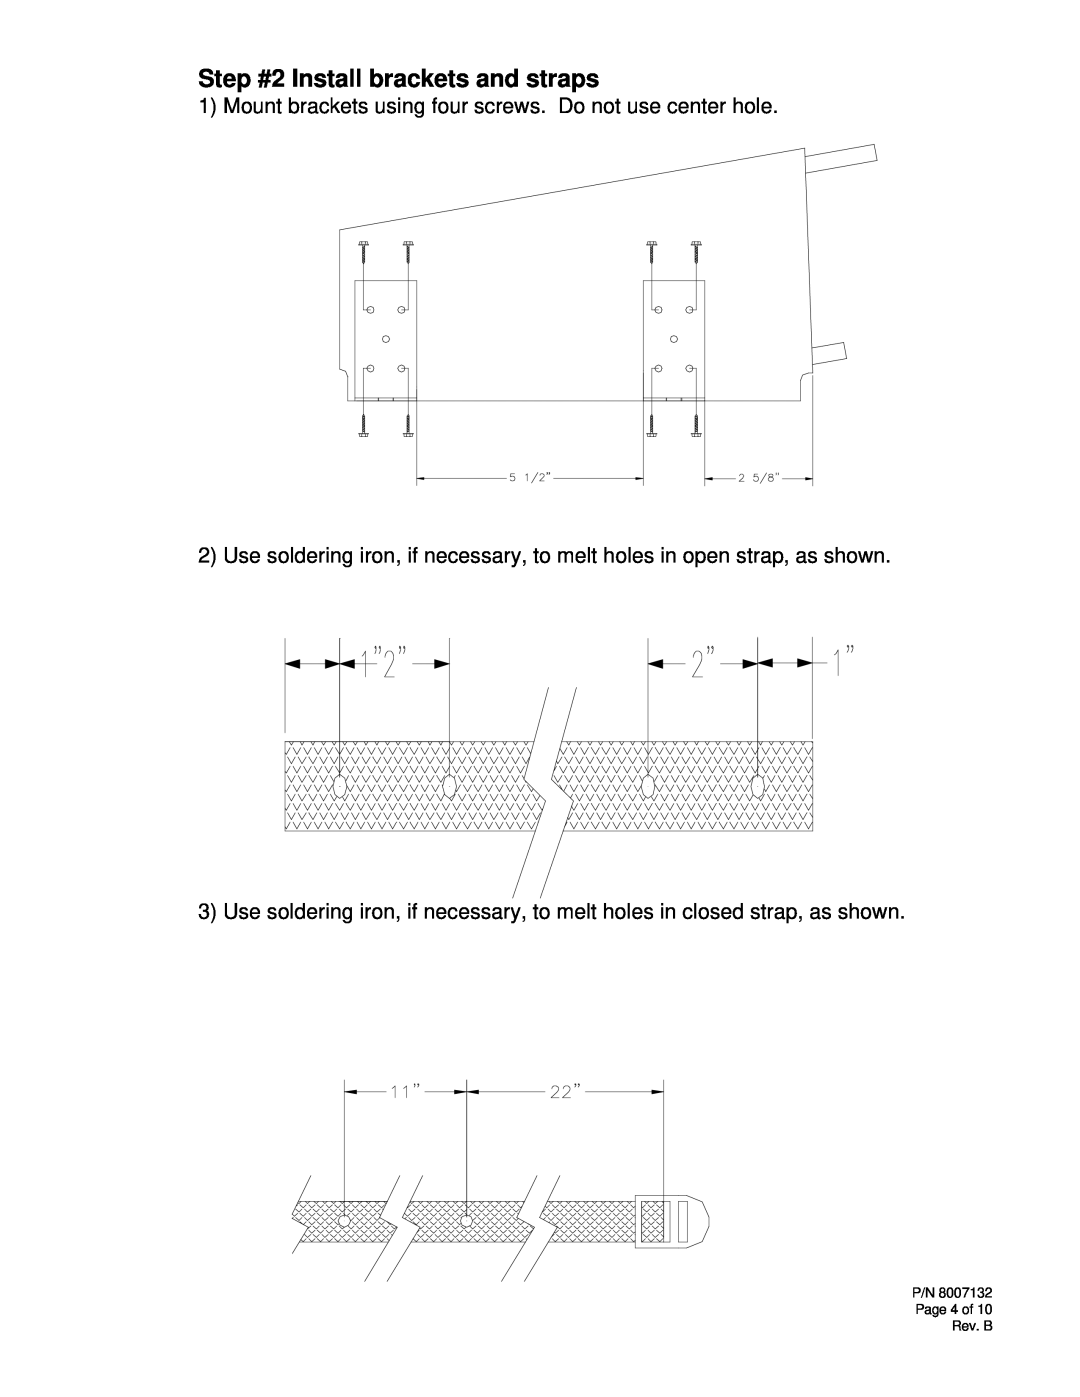 Audiovox K-9 installation instructions Step #2 Install brackets and straps, P/N Page 4 of Rev. B 